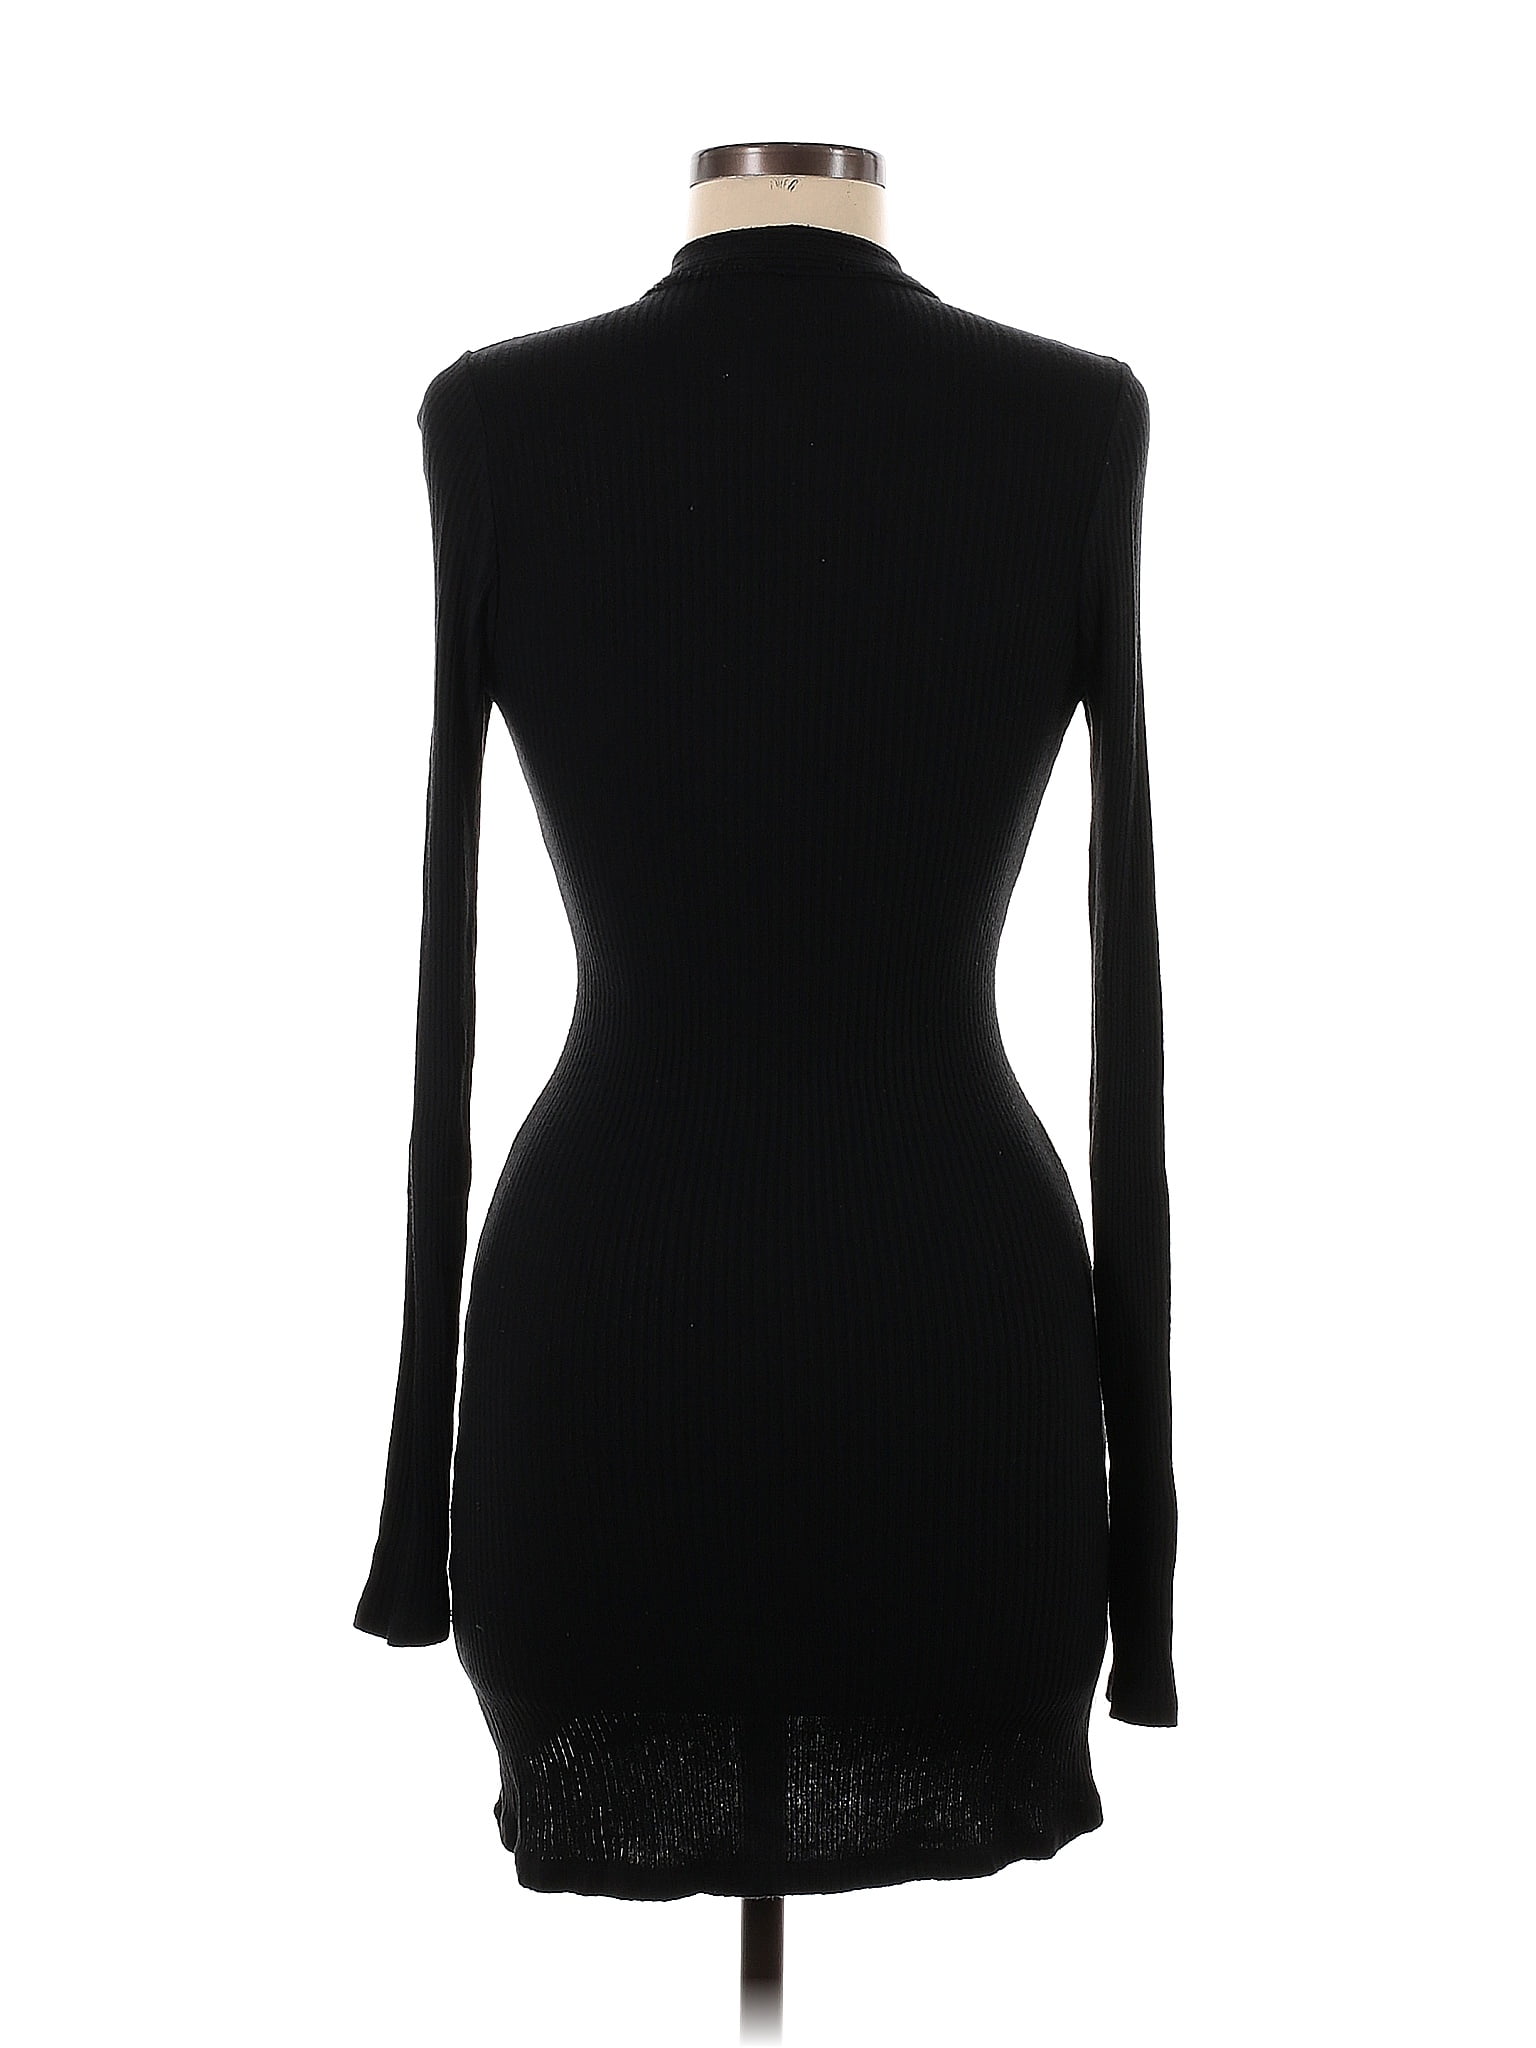 Brandy Melville Solid Black Casual Dress One Size - 50% off